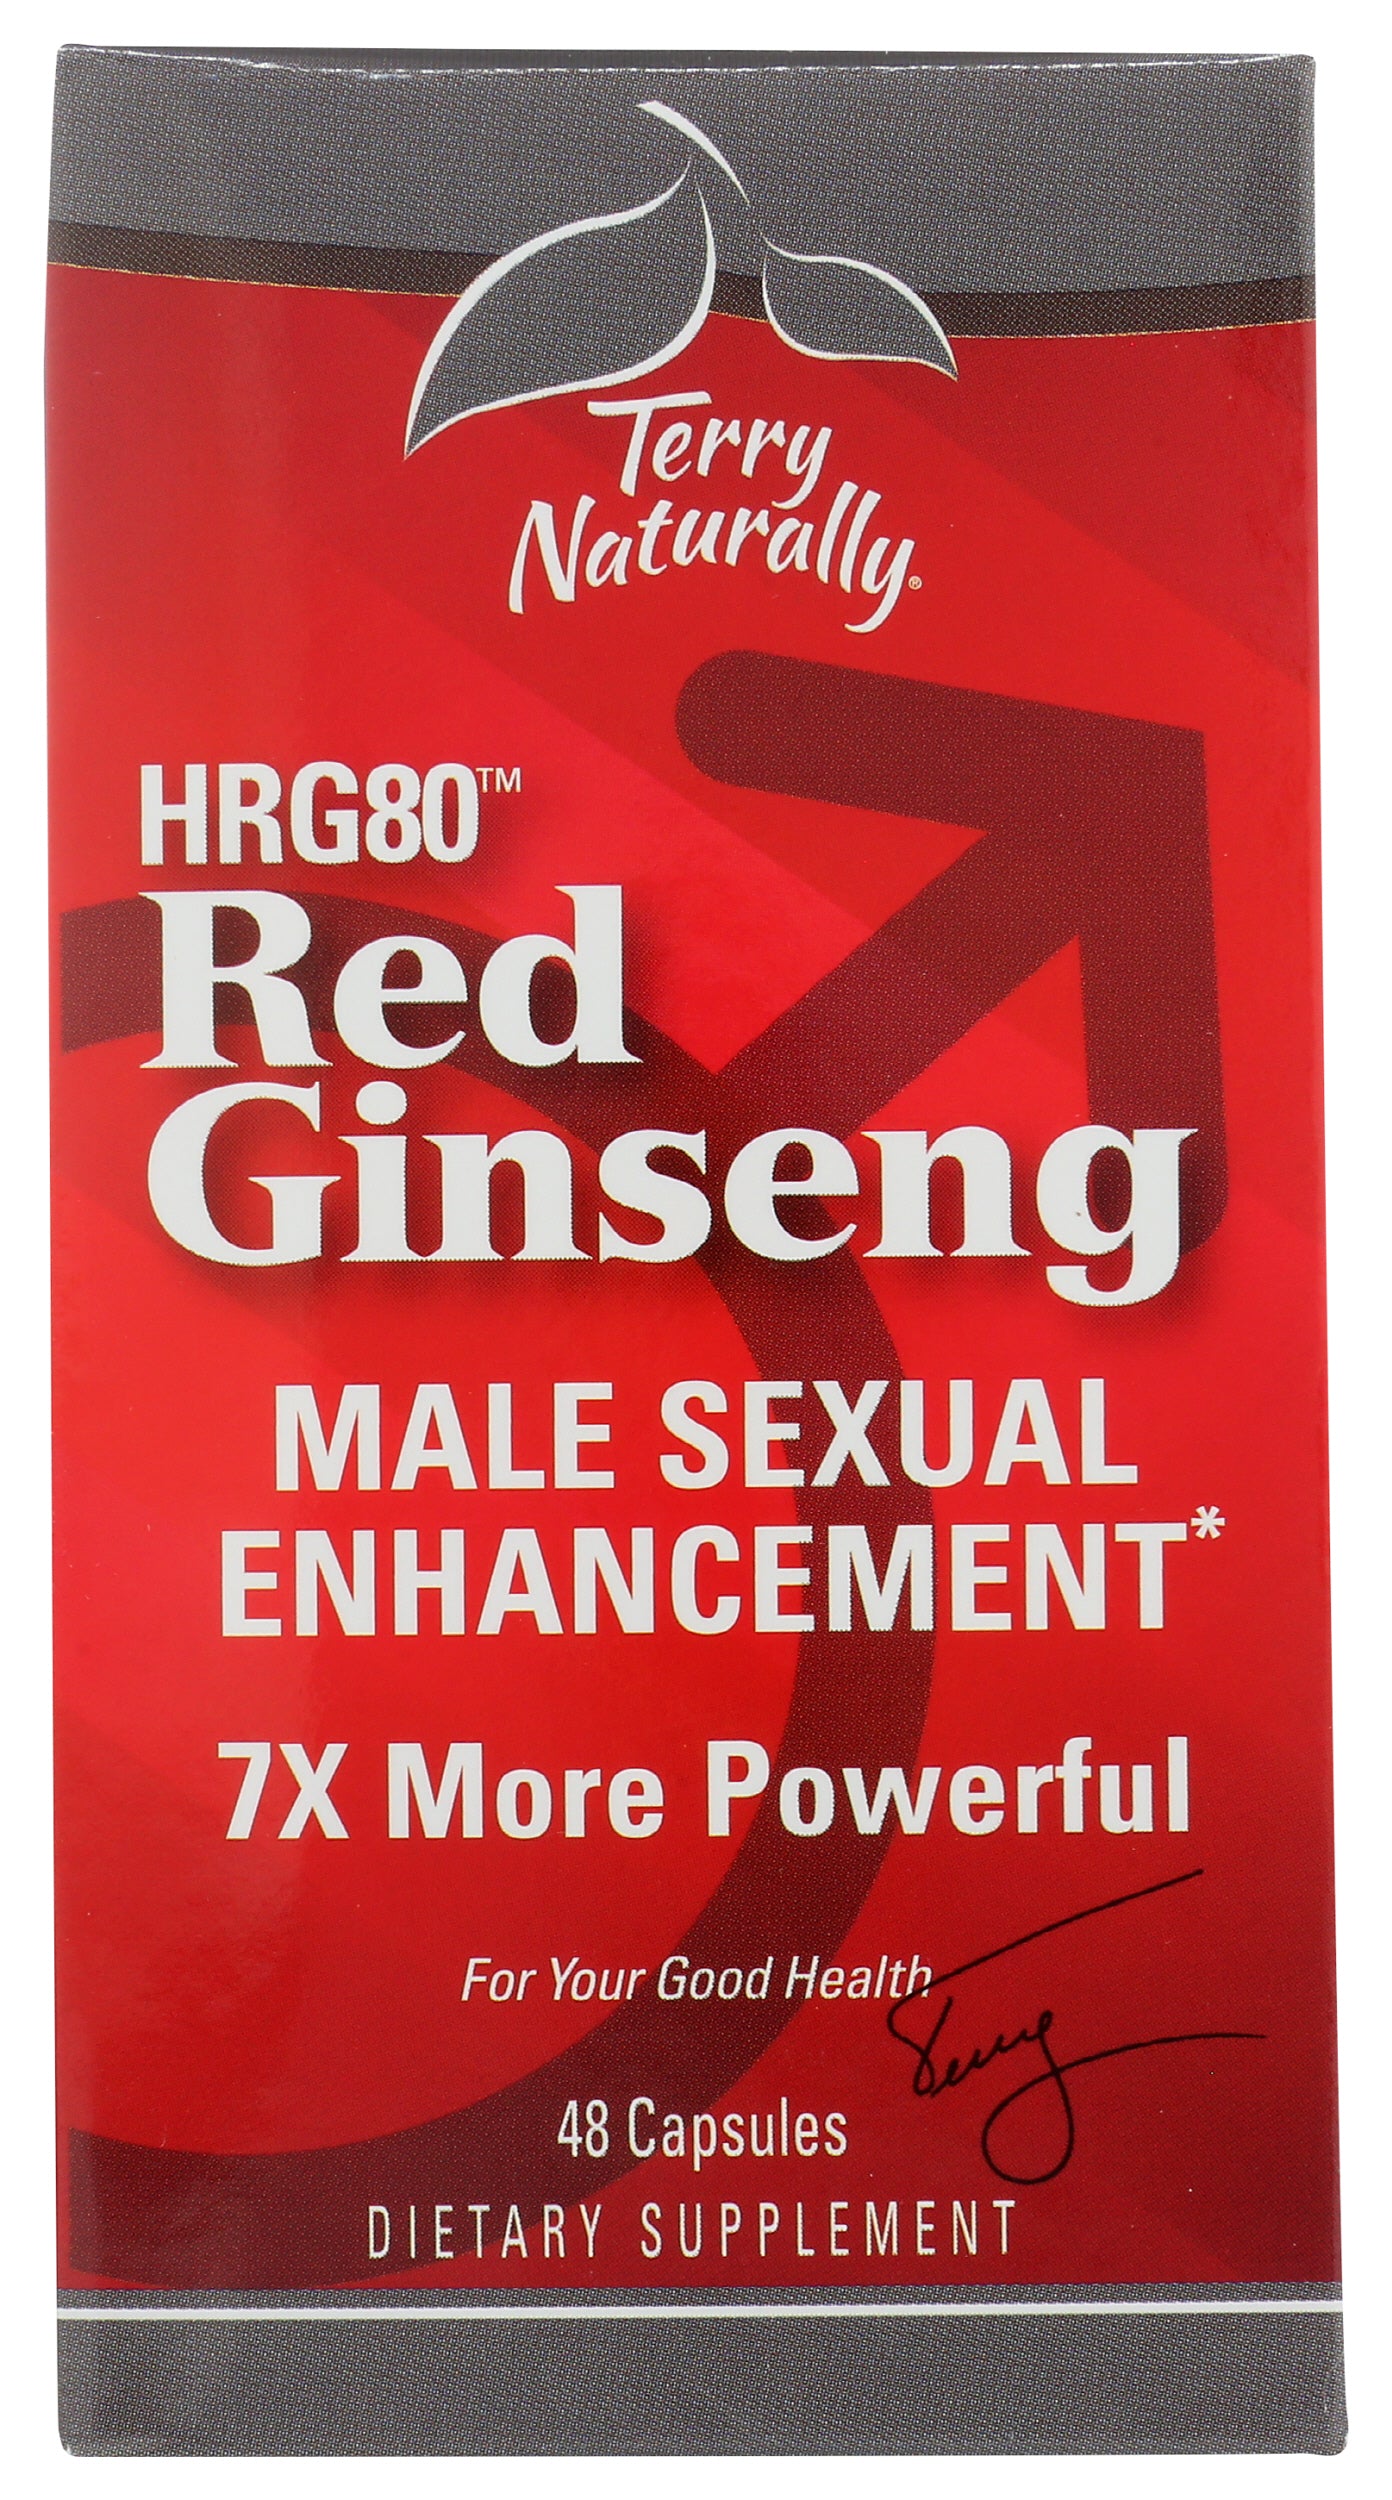 Terry Naturally HRG80 Red Ginseng 48 Capsules Front of Box